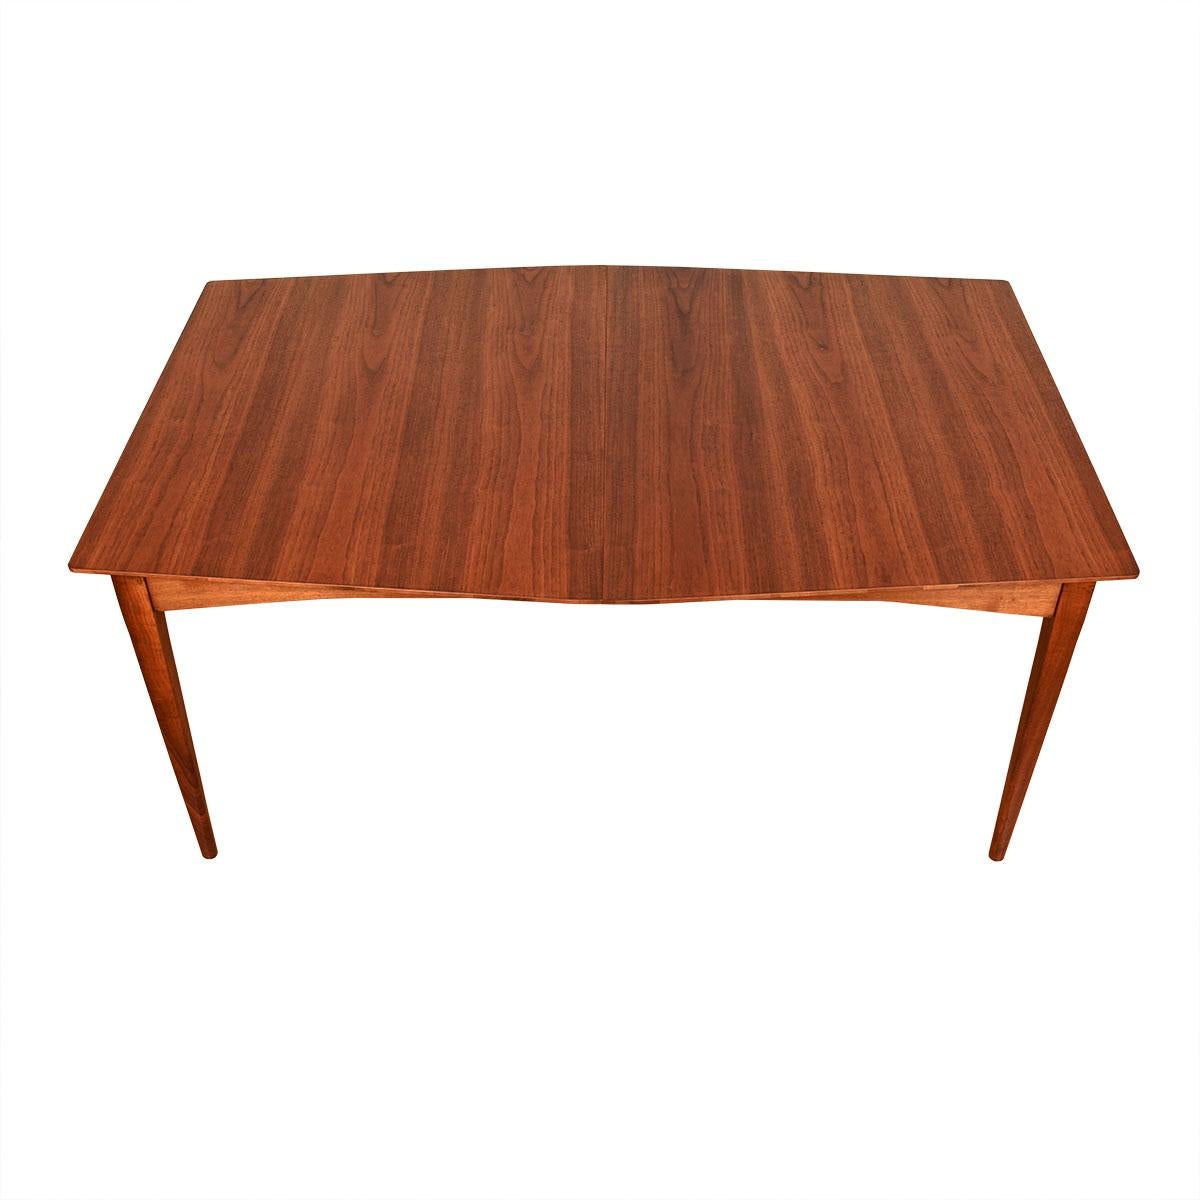 Gorgeous mid-century table with an unusual shape! Nice mid-Size for daily use and expands to a long length by the insertion of up to two leaves.
Great old American craftsmanship and quality materials ensure this will last another 60 years with